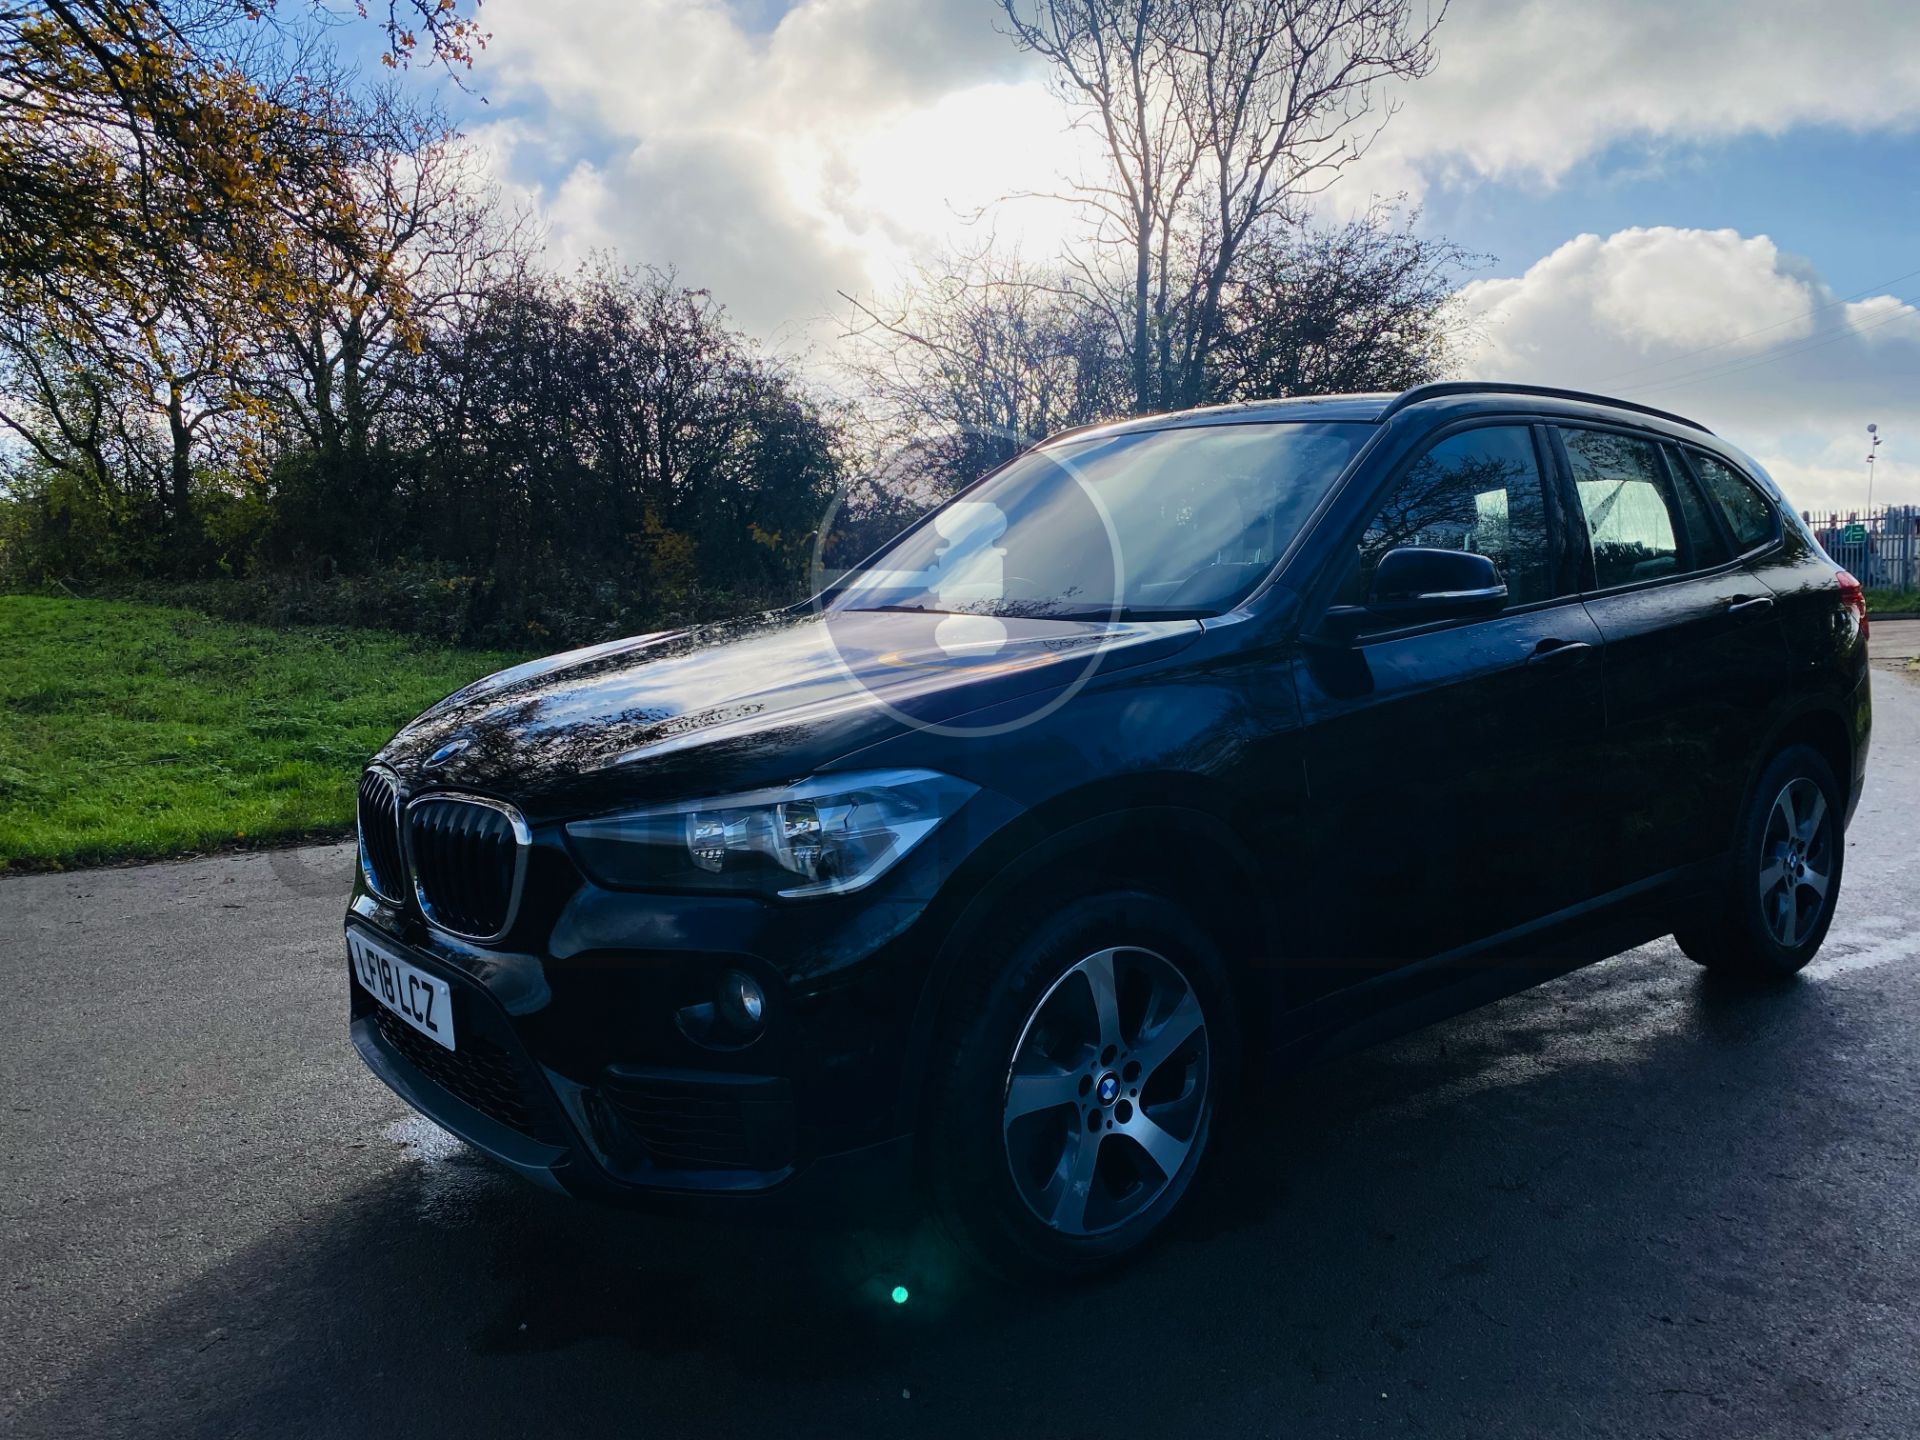 (ON SALE) BMW X1 sDRIVE 18d SE 2.0 DIESEL - 18 REG - 1 OWNER FROM NEW - SAT NAV - AIR CON - - Image 5 of 36